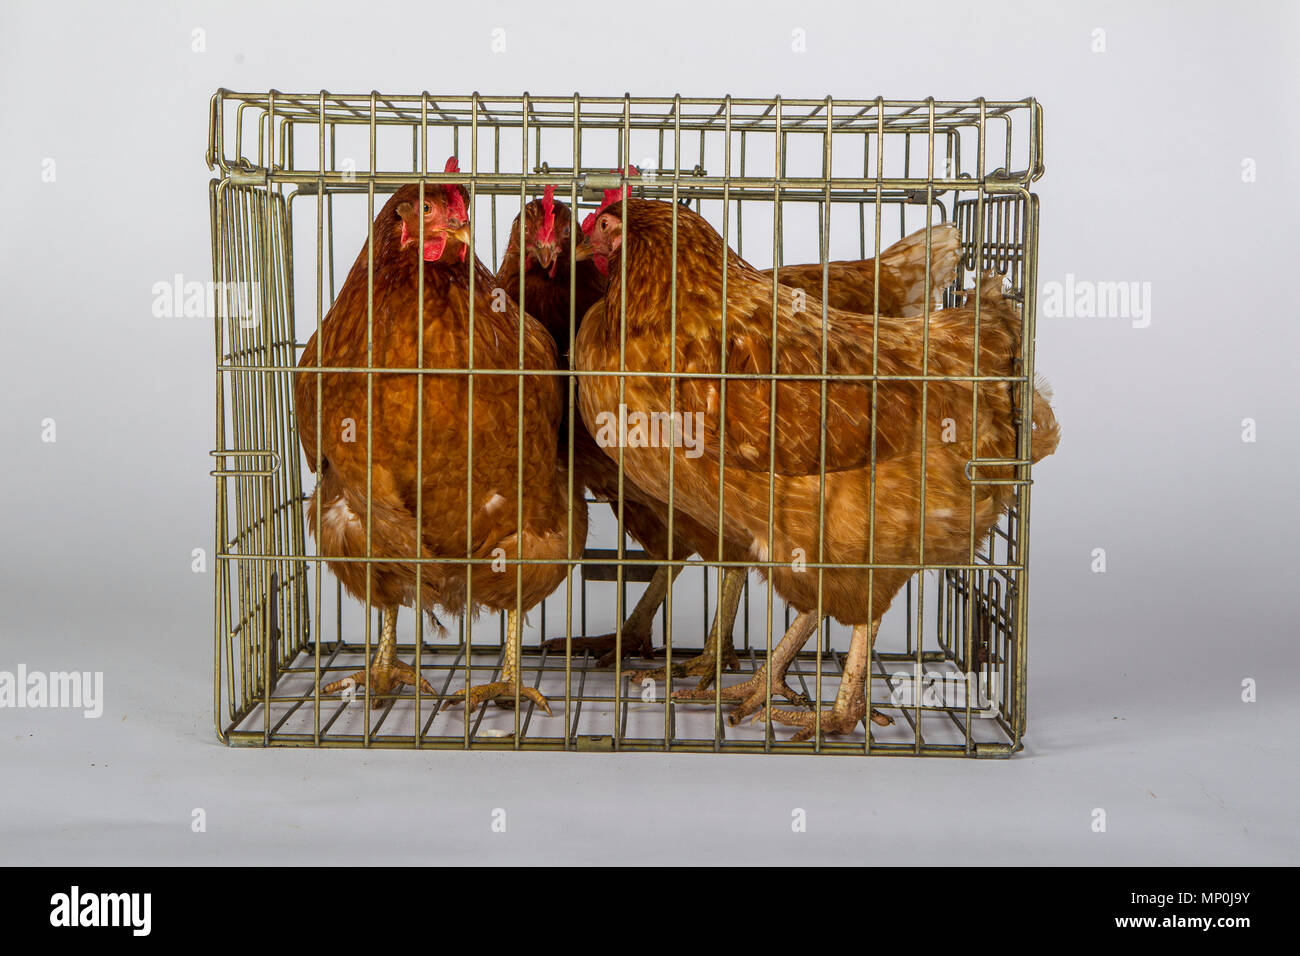 Chickens in a cage Stock Photo